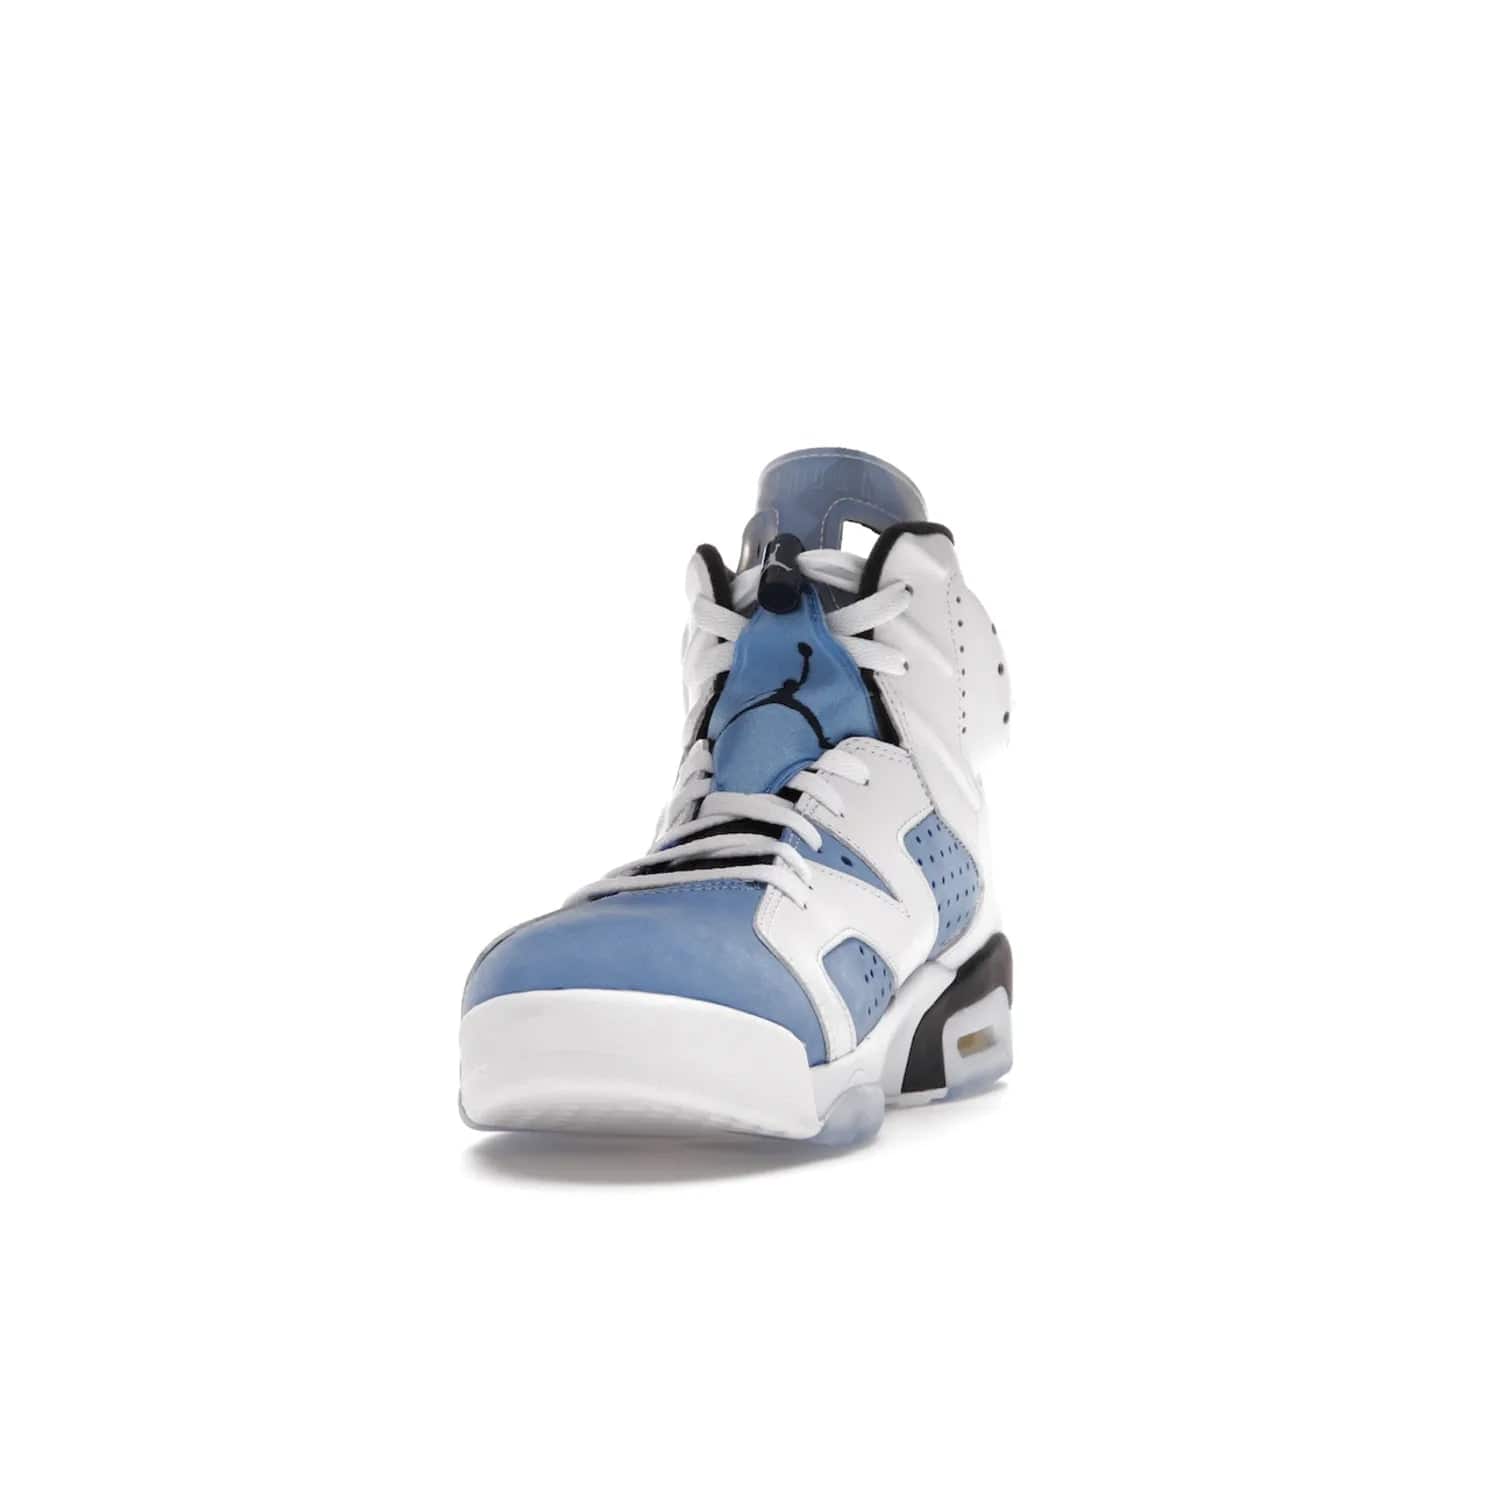 Jordan 6 Retro UNC White - Image 12 - Only at www.BallersClubKickz.com - Air Jordan 6 Retro UNC White with classic UNC colors brings nostalgia and style to a legendary silhouette. Celebrate MJ's alma mater with navy blue accents, icy semi-translucent sole and Jordan Team patch. Out March 2022 for the Sneaker Enthusiast.